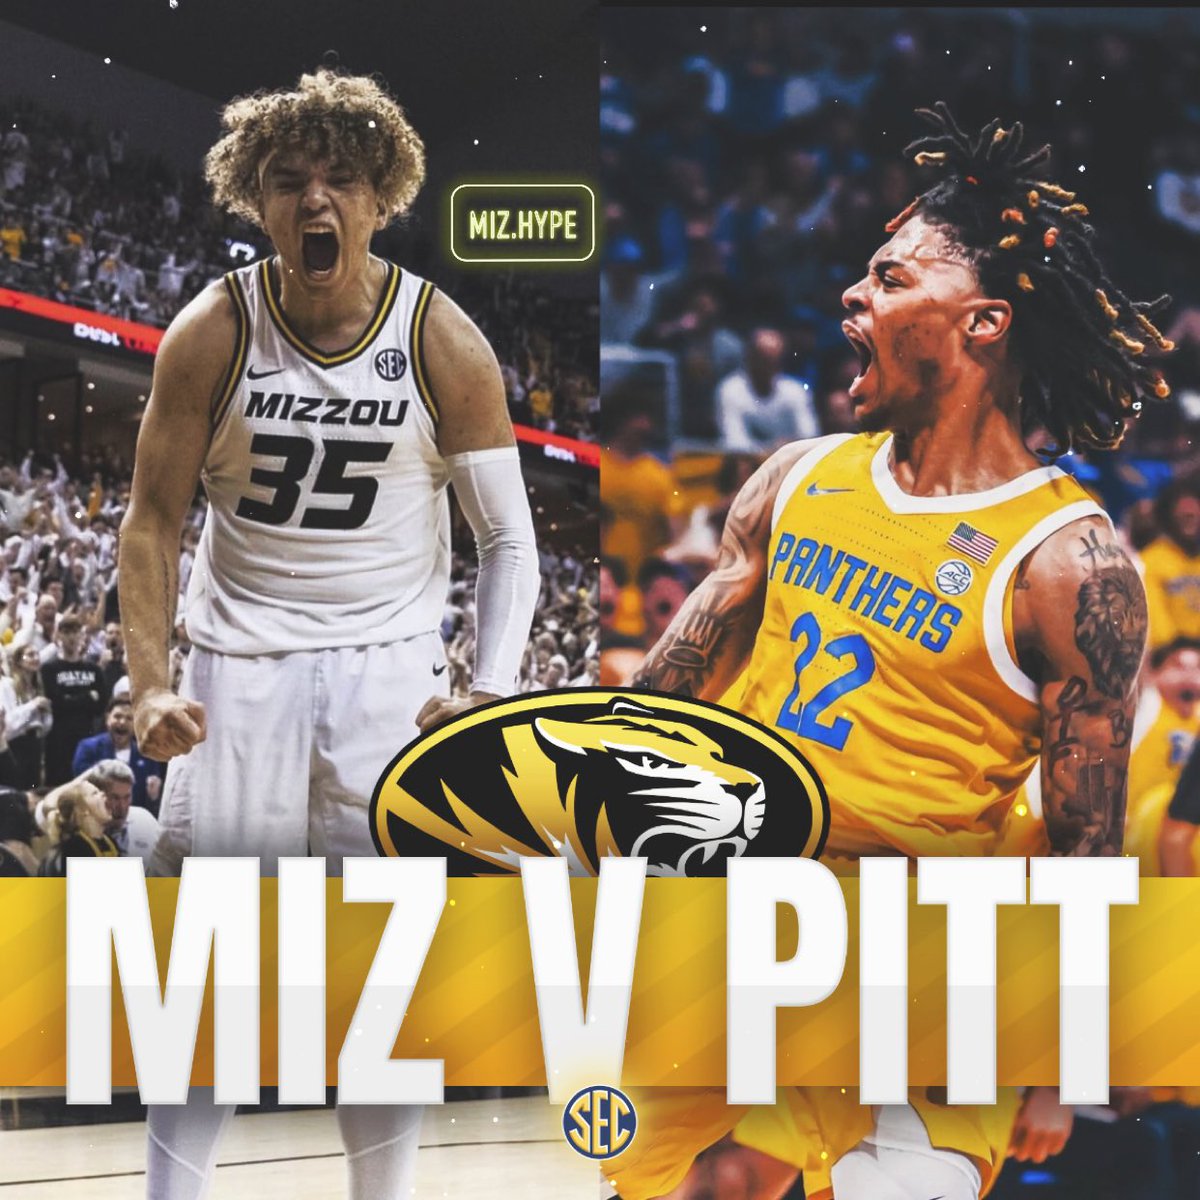 The SEC/ACC challenge is here! 

Mizzou takes on Pitt in Captain city.
#ZouVZoo